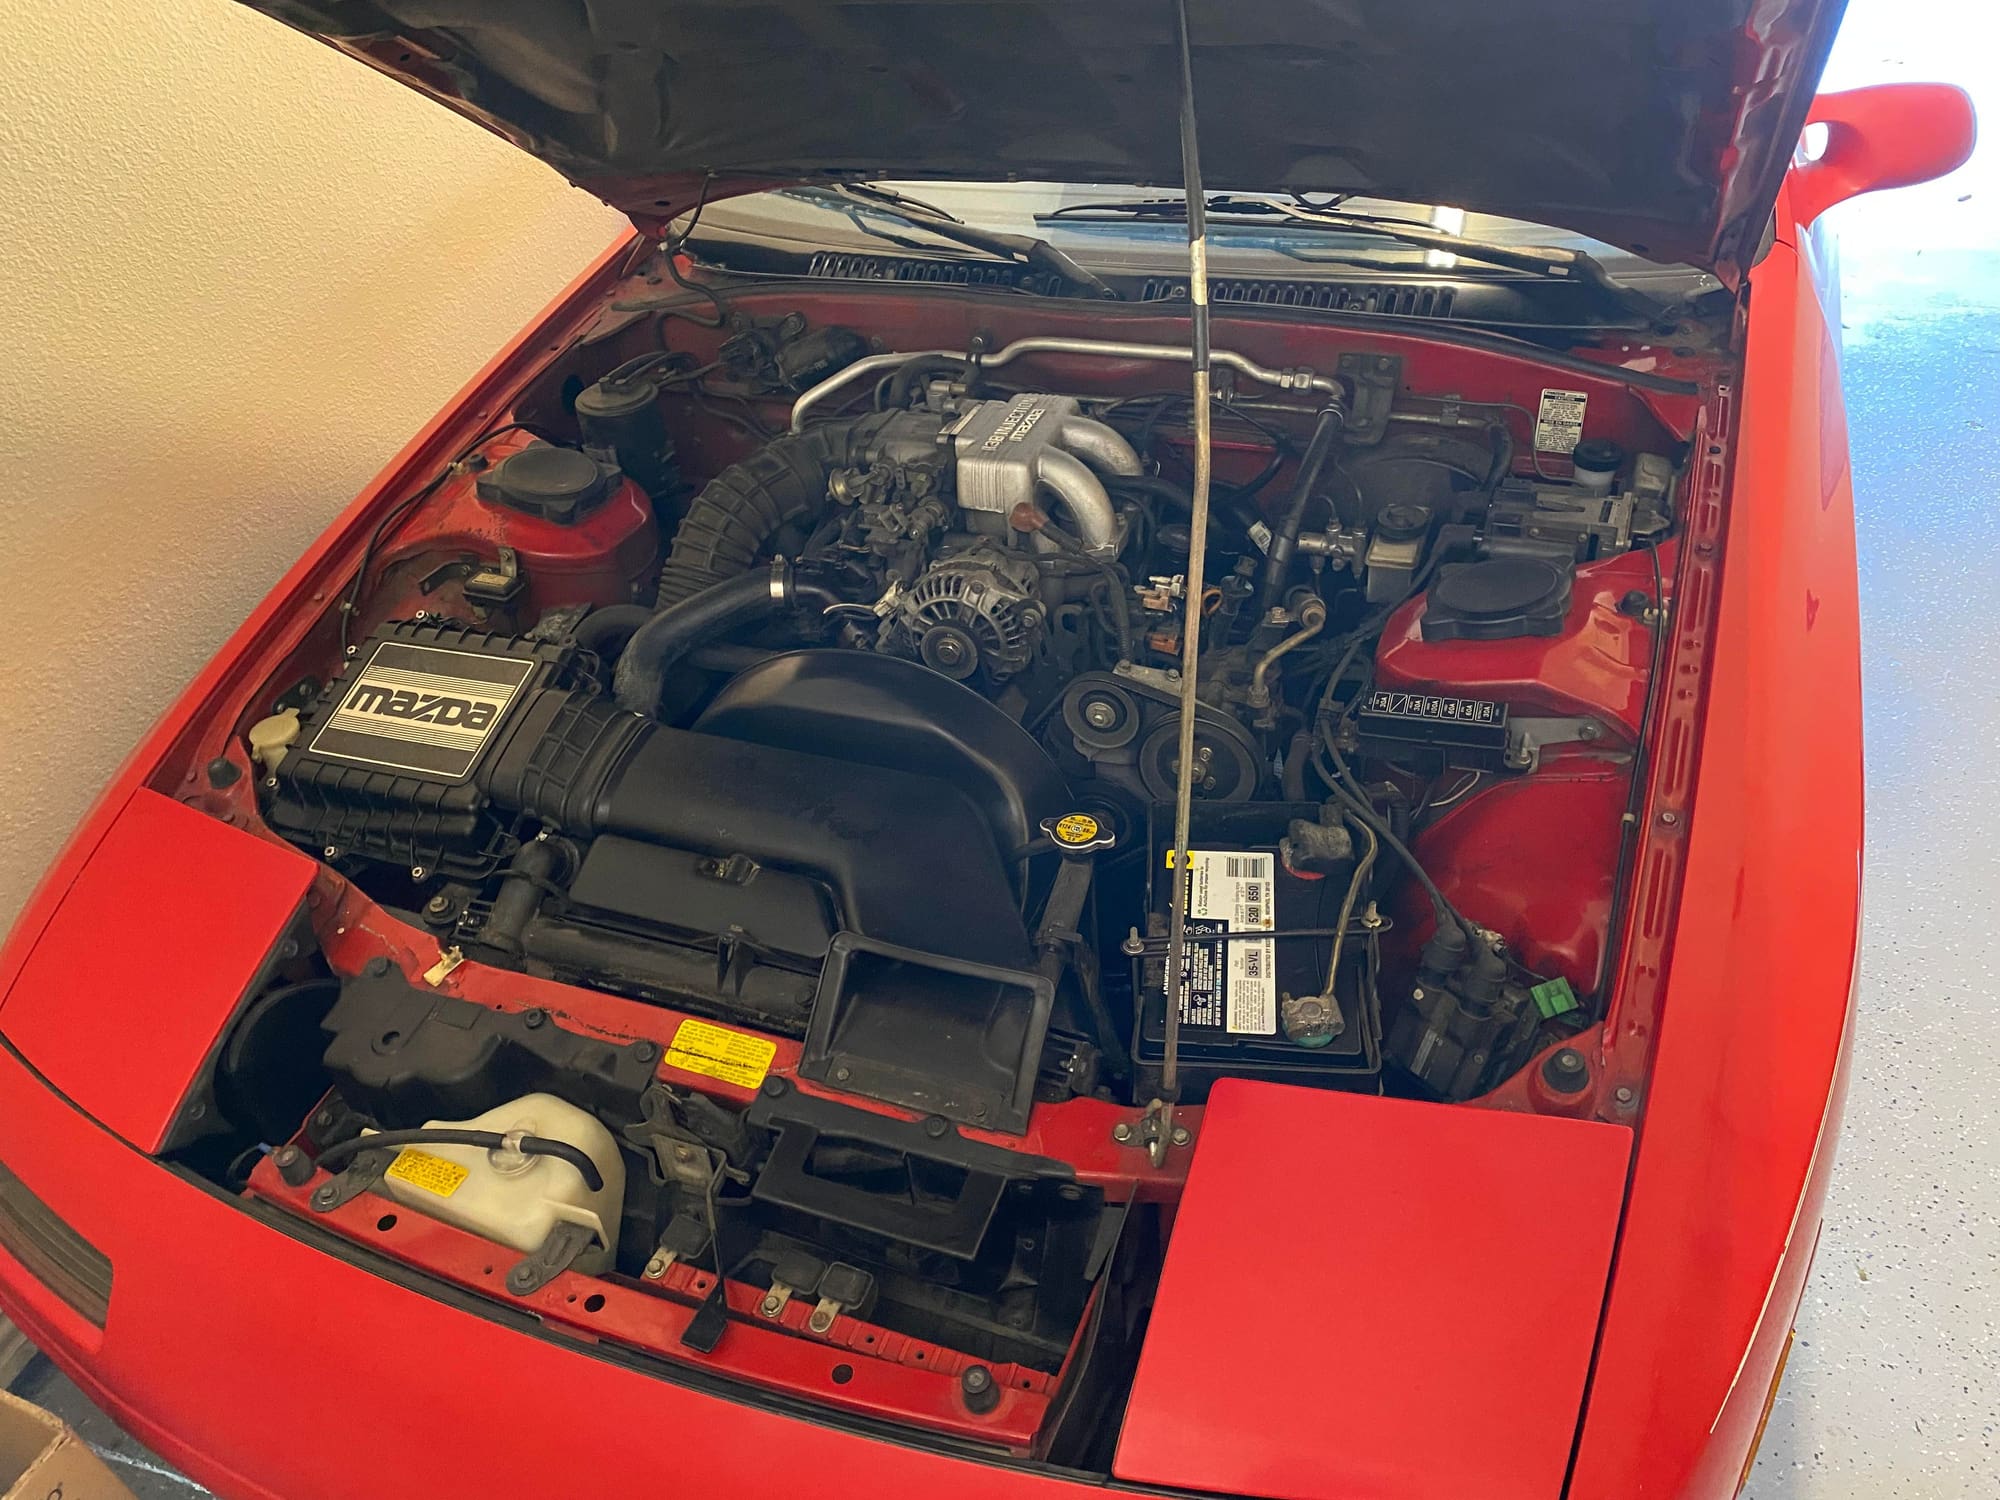 1990 Mazda RX-7 - 1990 na fc3 - Used - VIN JM1FC3319L0802915 - 158,938 Miles - Other - 2WD - Manual - Hatchback - Red - Plano, TX 75011, United States